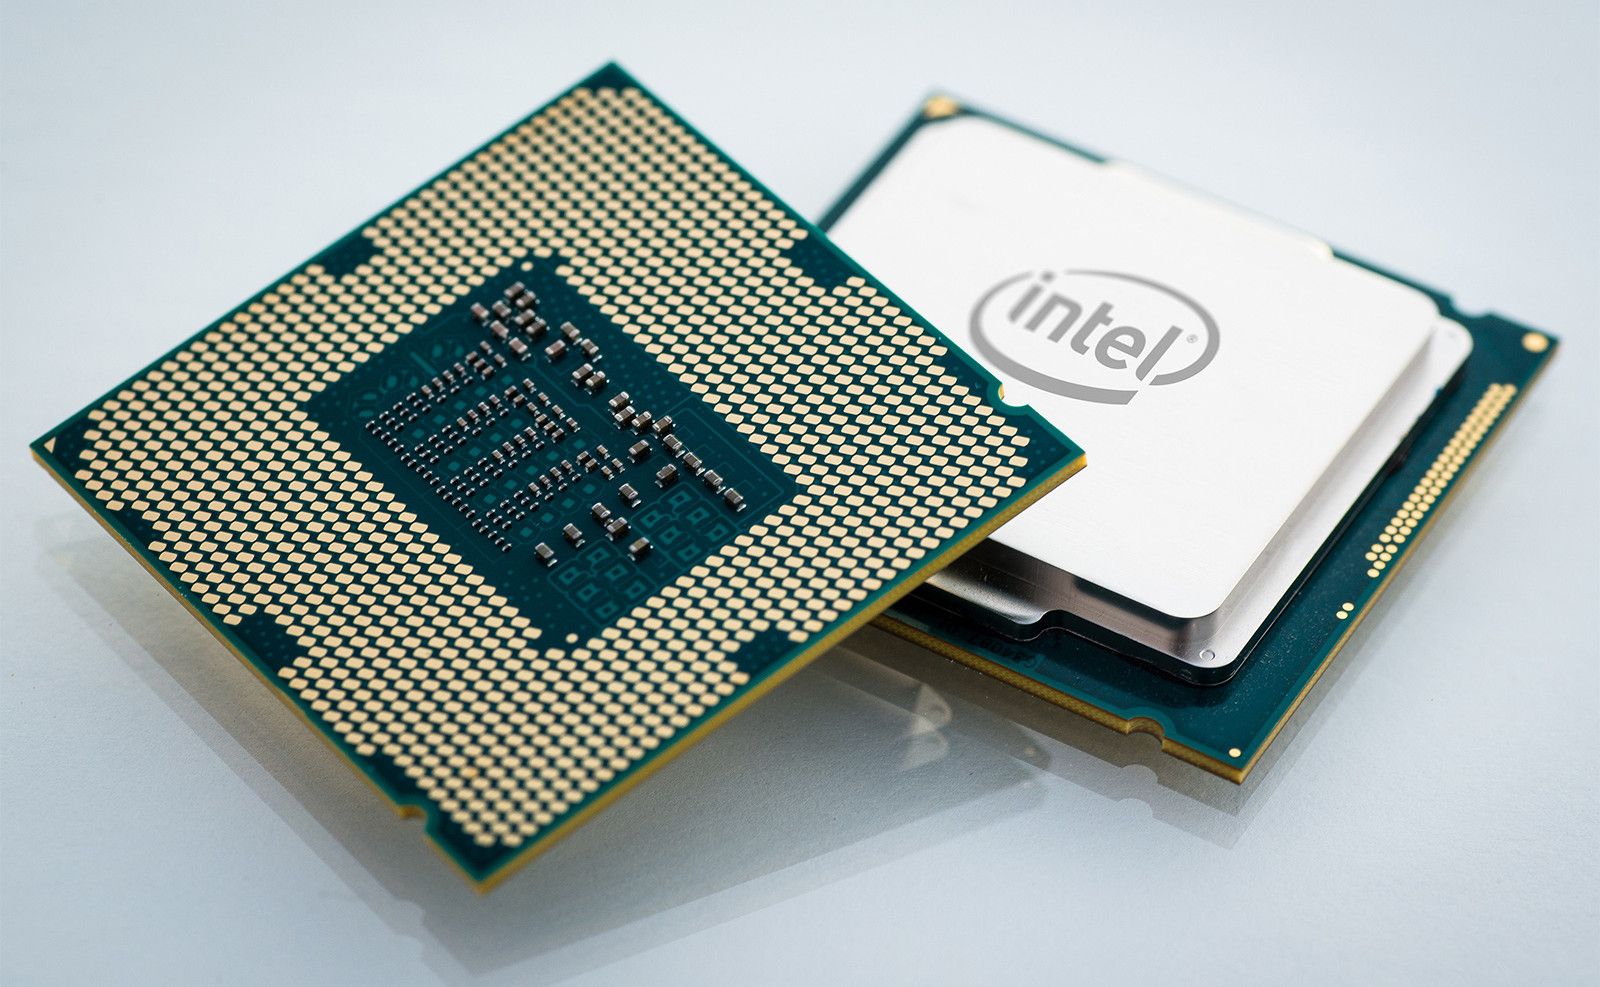 Some games might need an update to be compatible with Intel Alder Lake processors